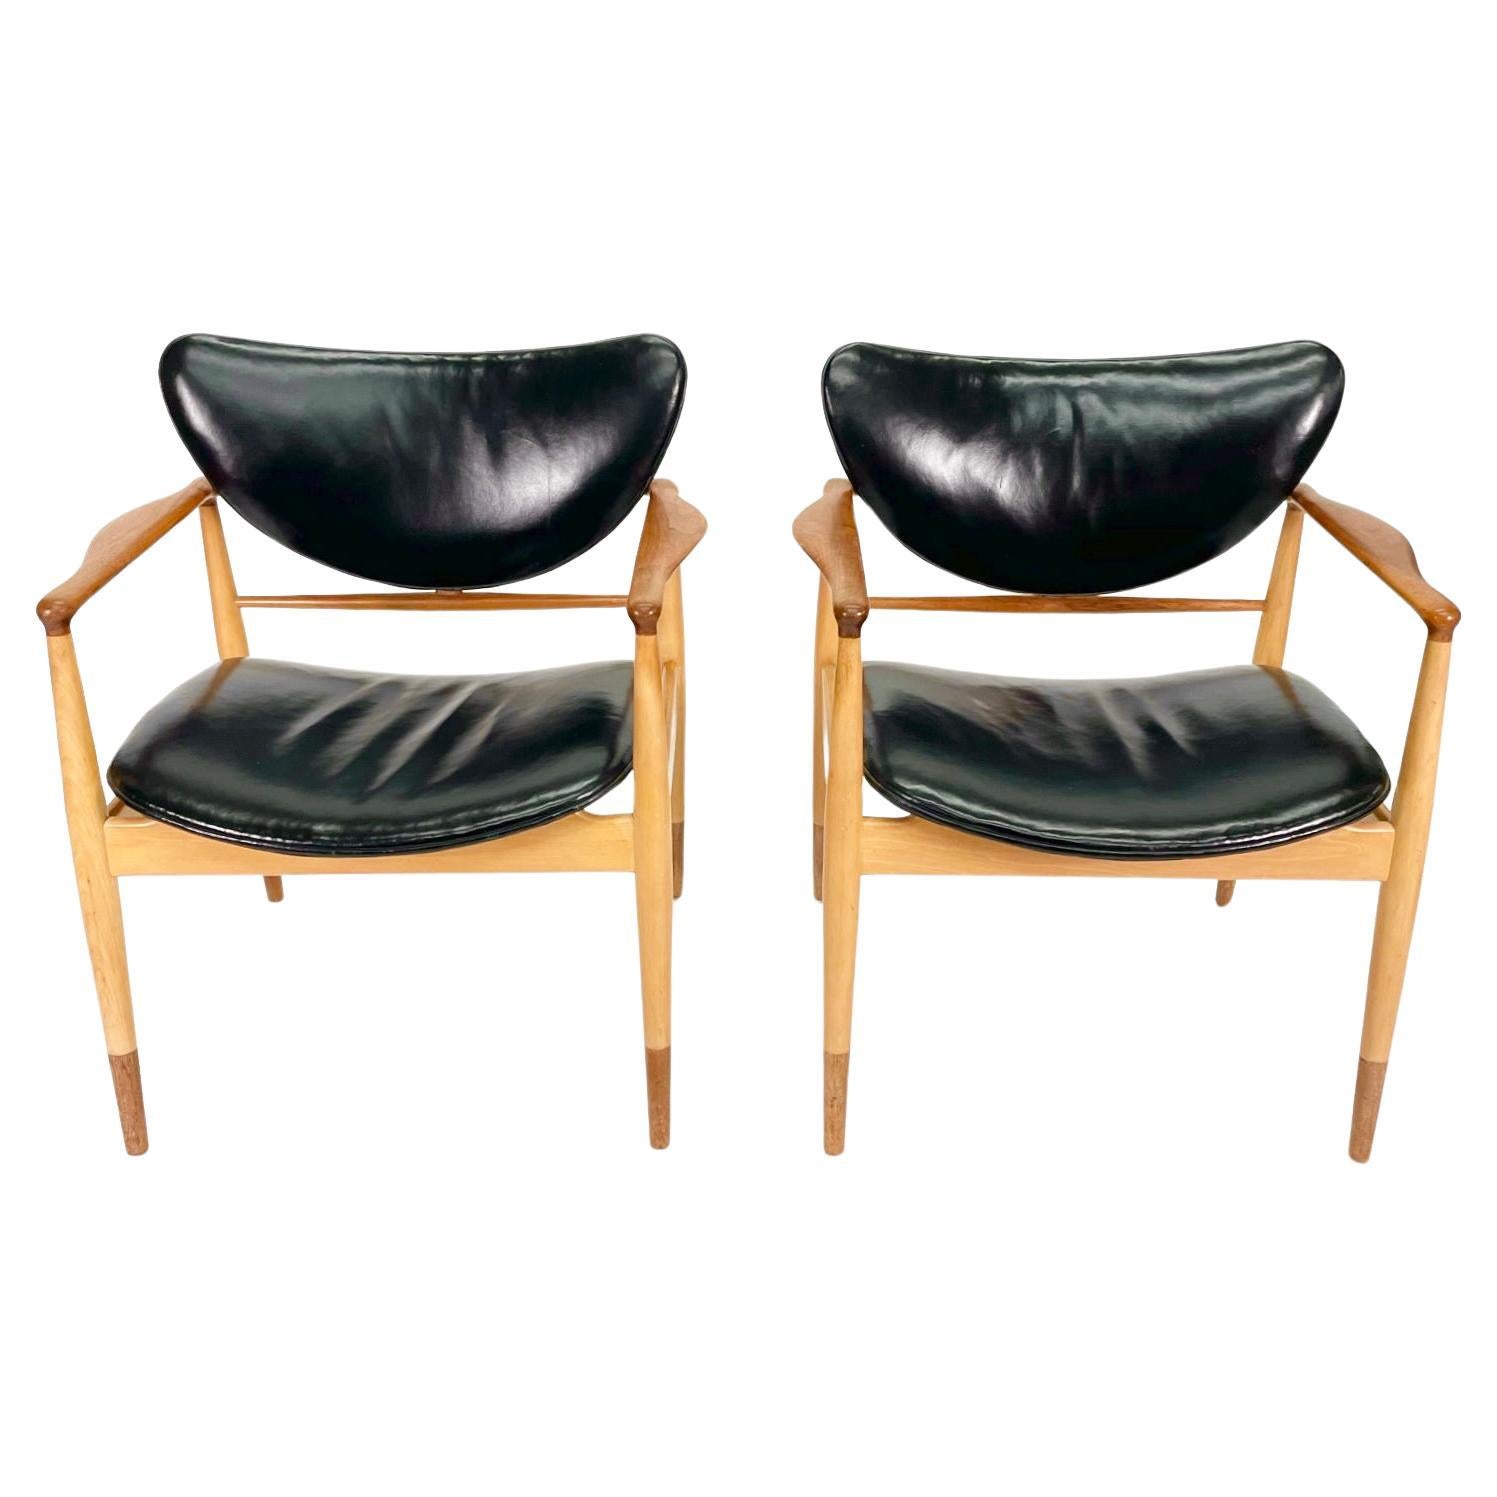 *Currently being restored*

This set of 2 Finn Juhl Model 48 Chairs by Baker feature solid teak and maple frames in two tones that are beautifully sculpted and incredibly comfortable with an equally attractive curved seat and back in original black